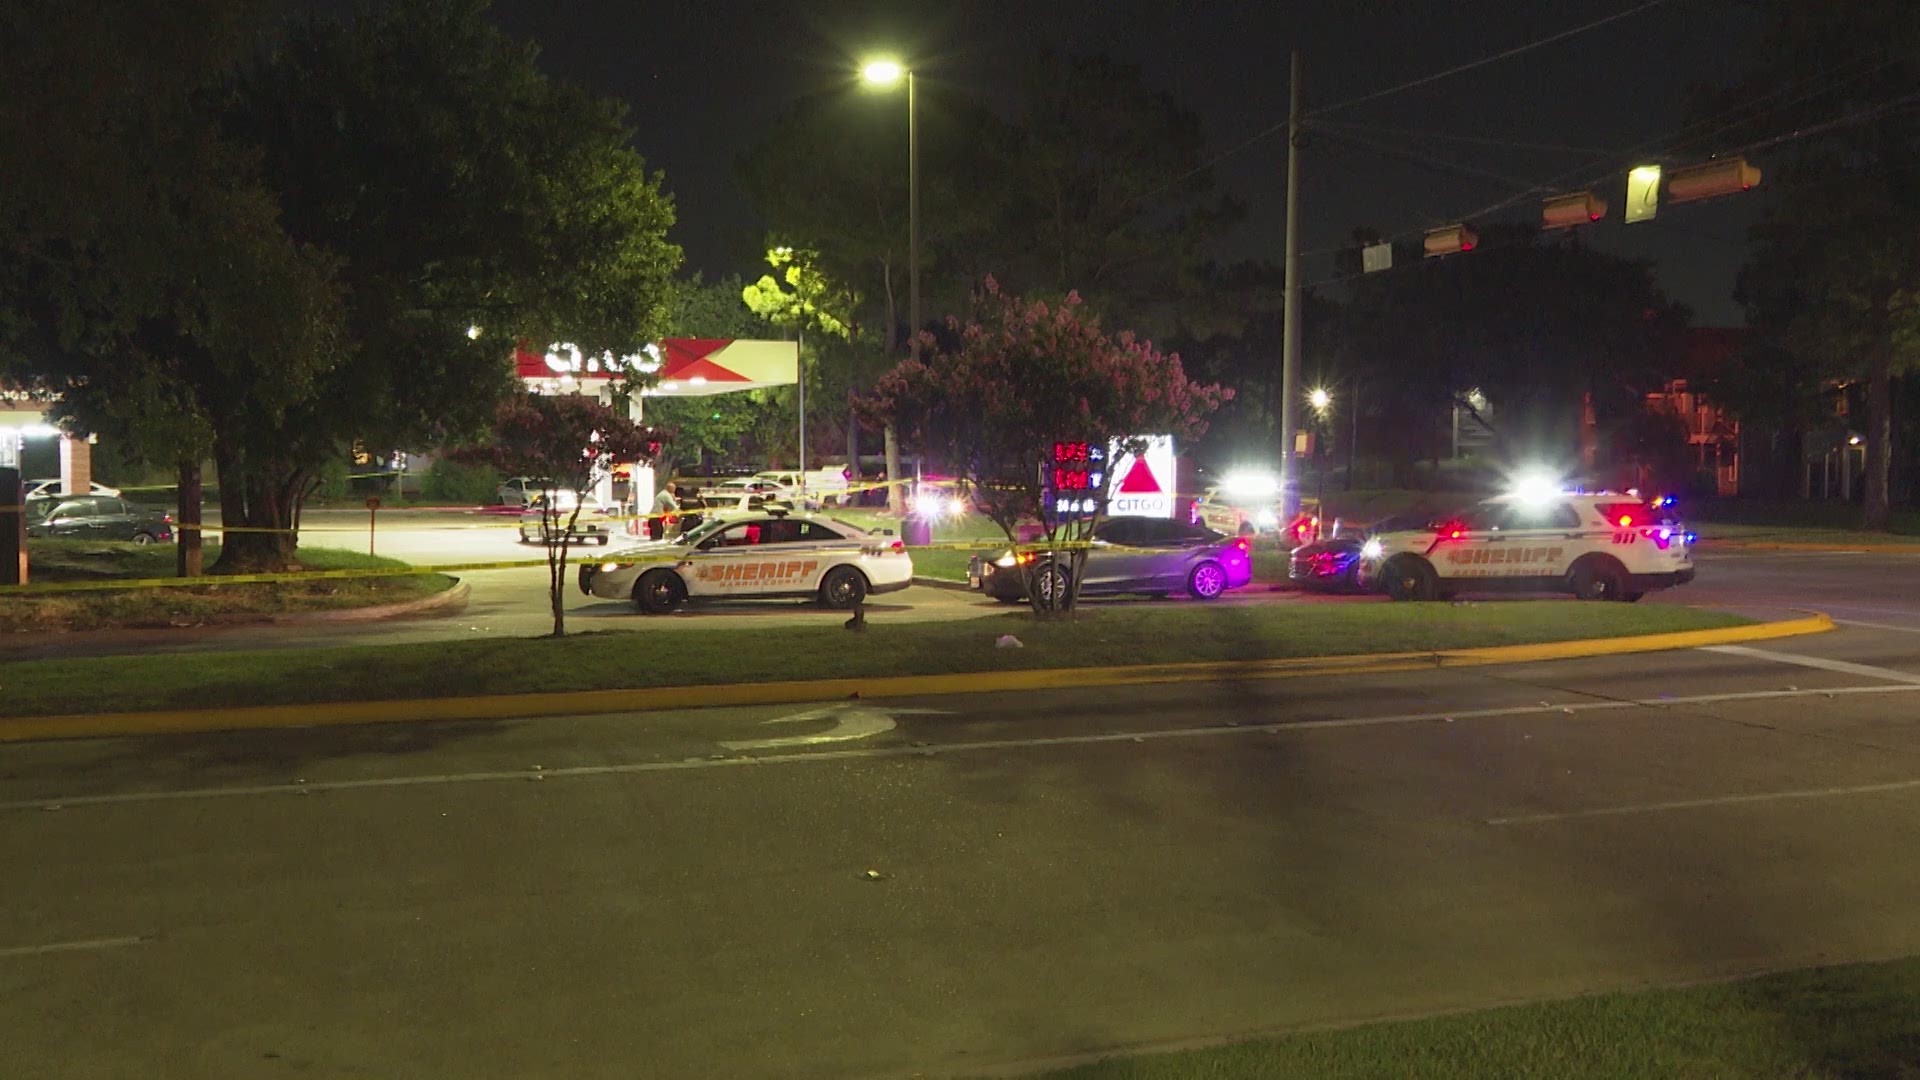 Harris County Sheriff's Office deputies responded to a shooting late Sunday involving two groups of men. Investigators said at least one person was shot.